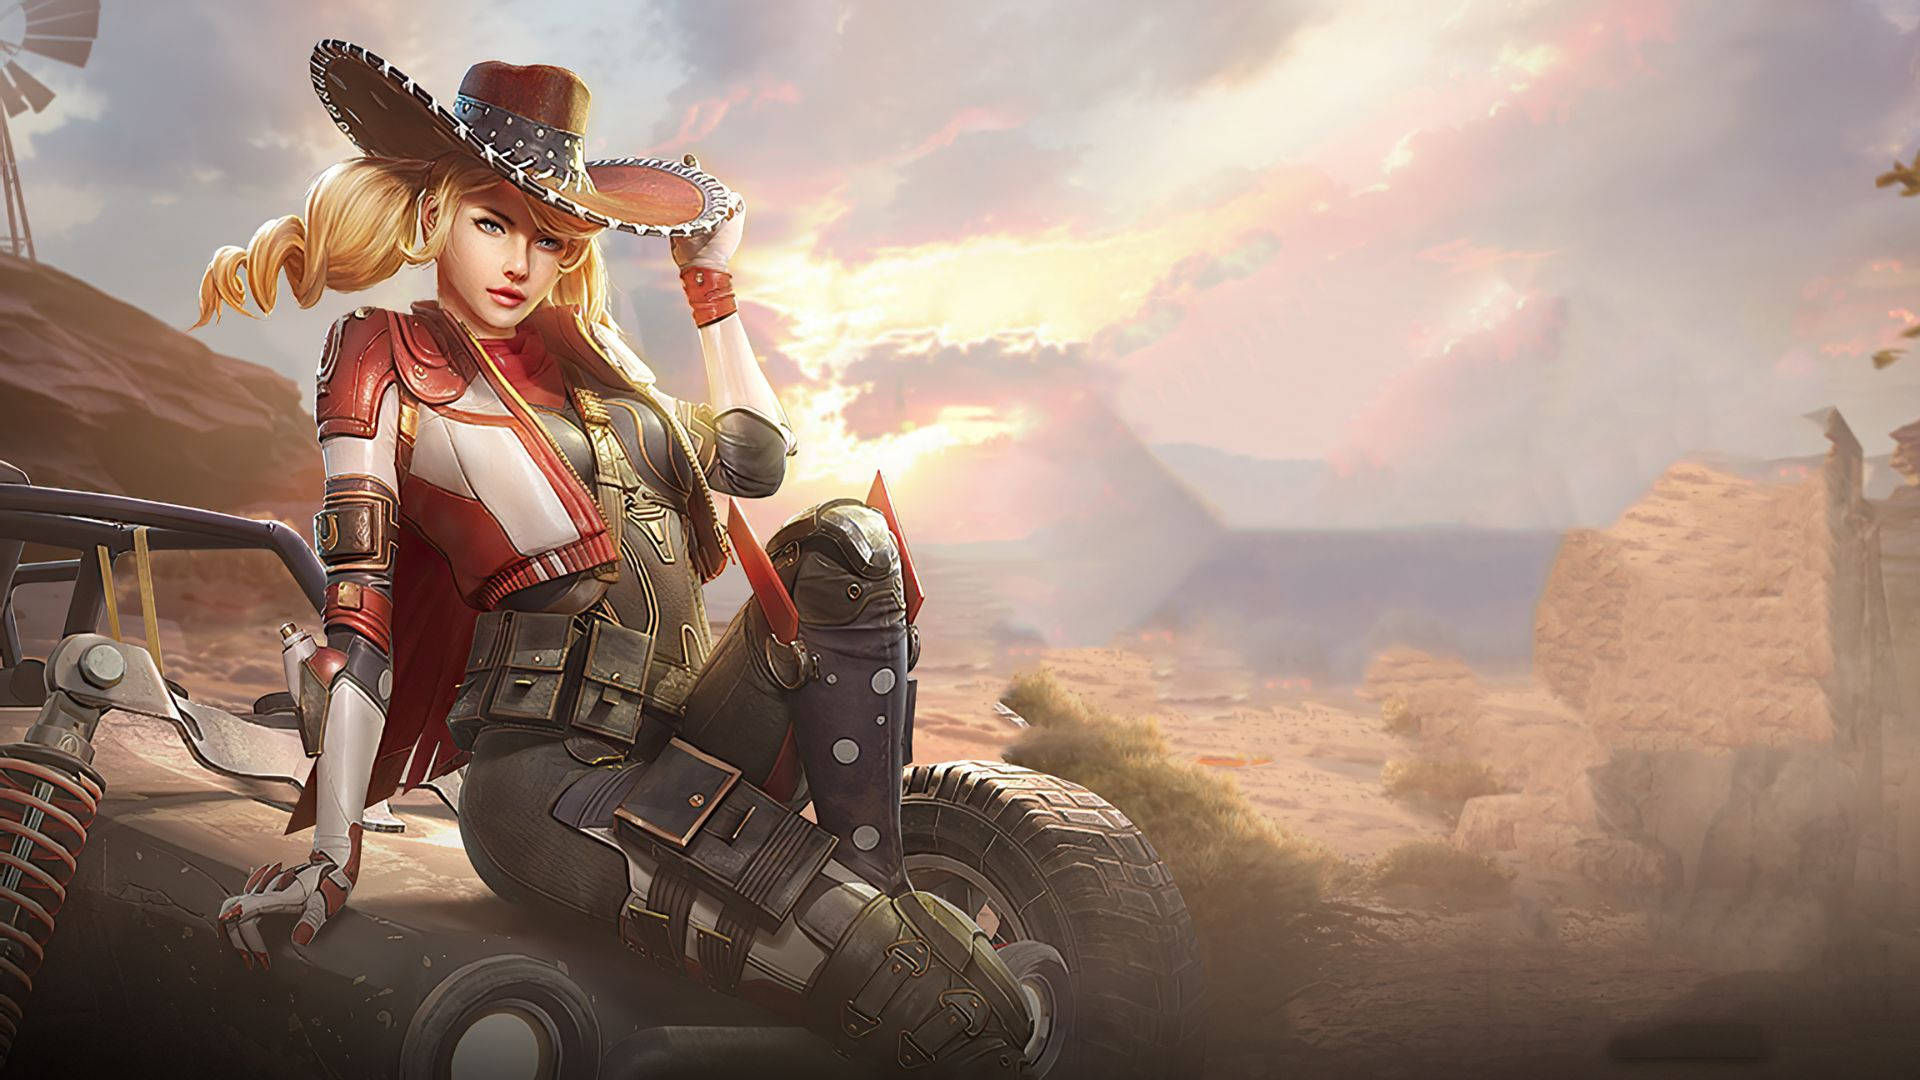 Animated Blonde Cowgirl Wallpaper